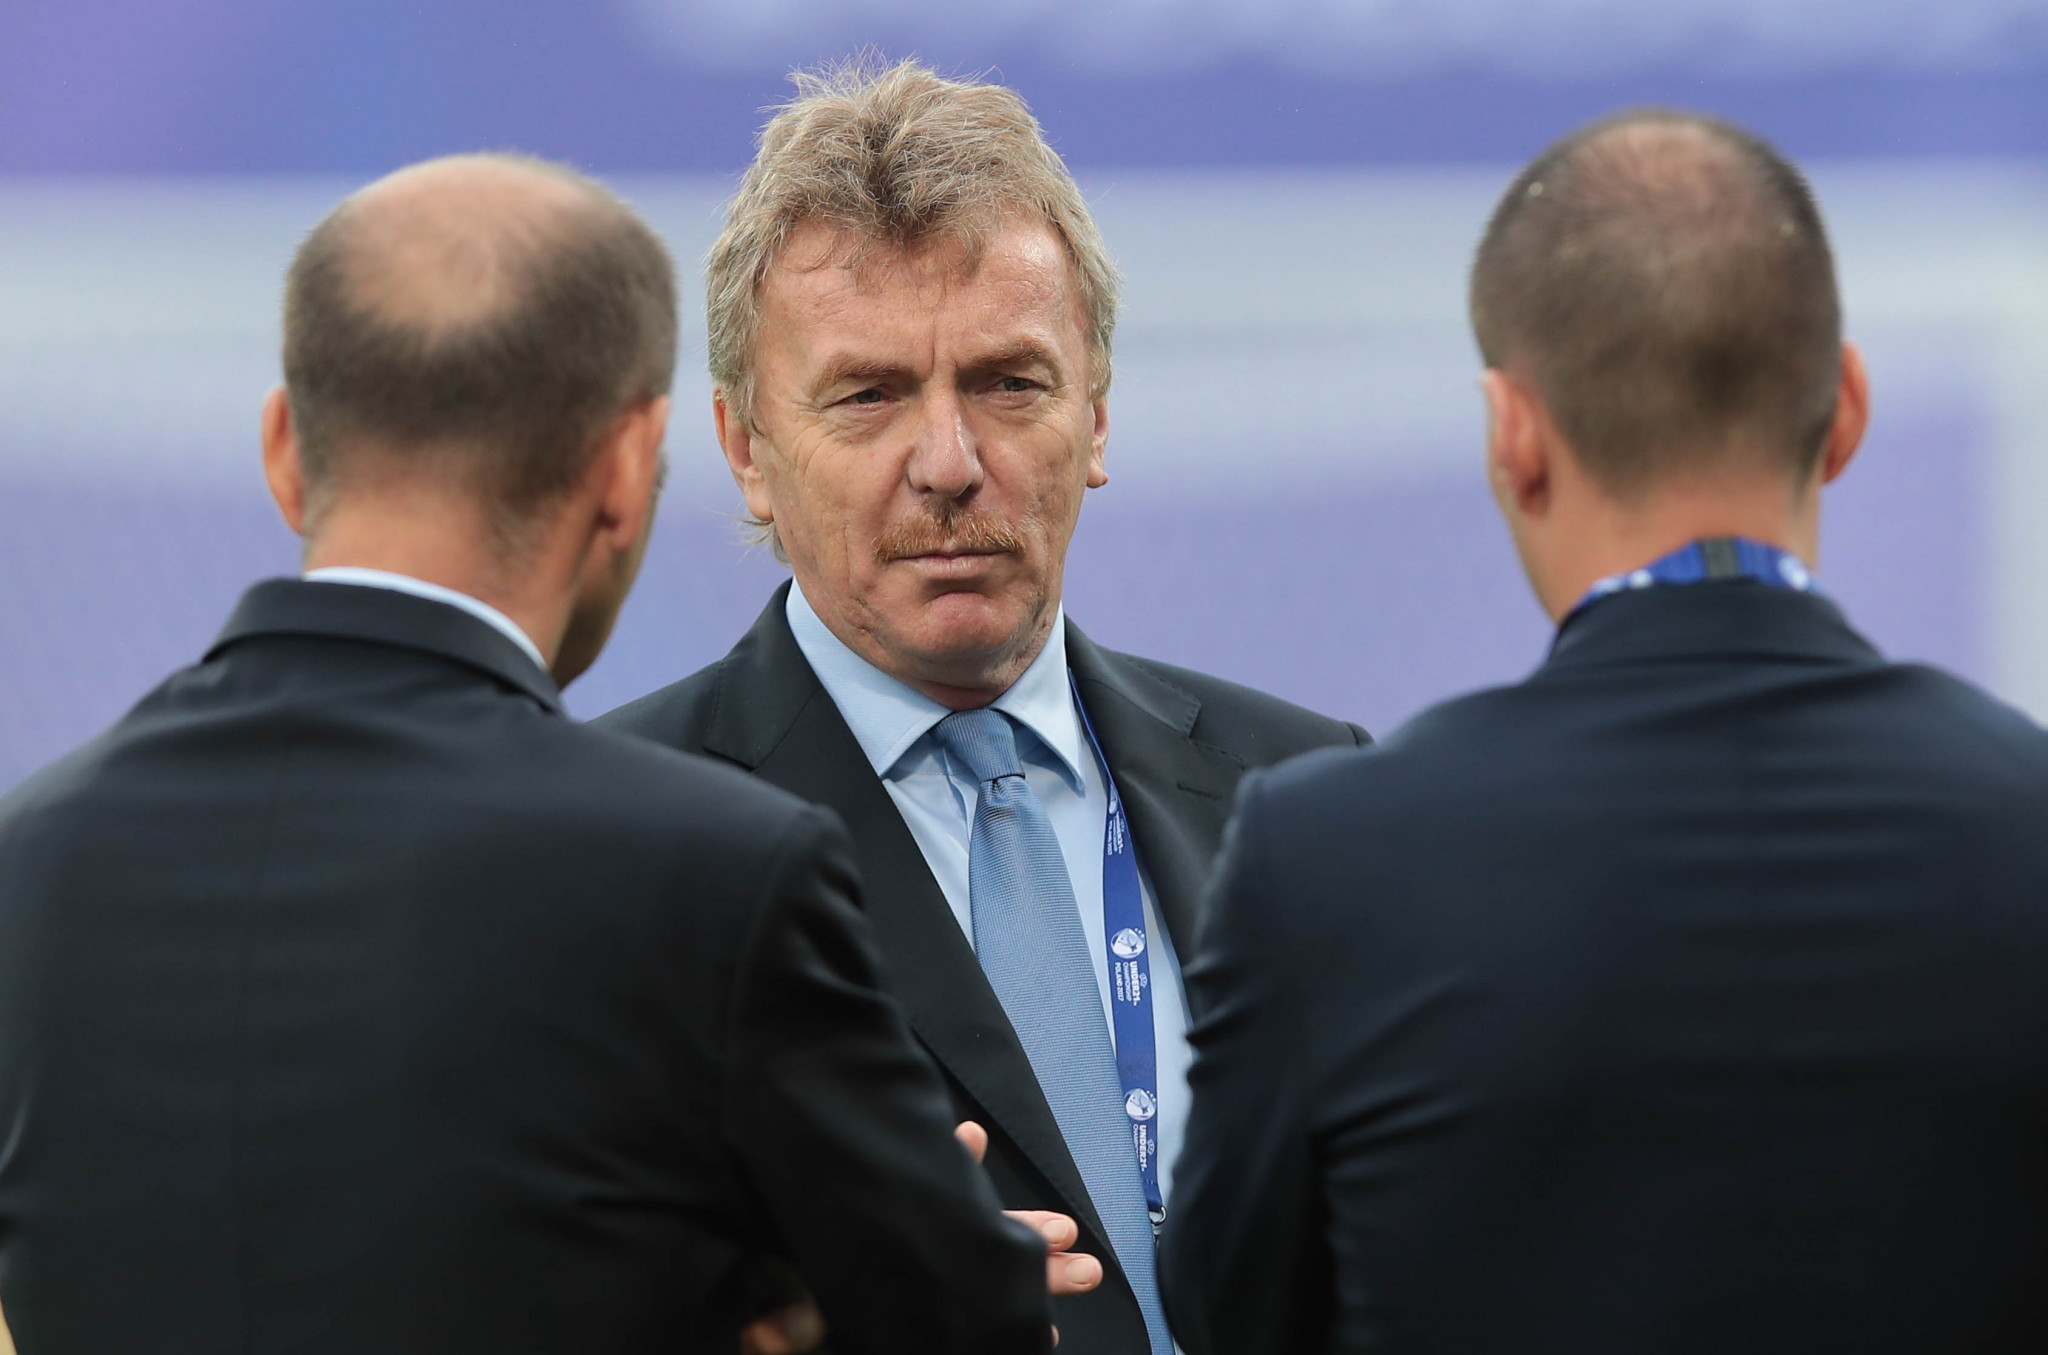  Zbigniew Boniek is among the nine candidates seeking election to the UEFA Executive Committee ©Getty Images